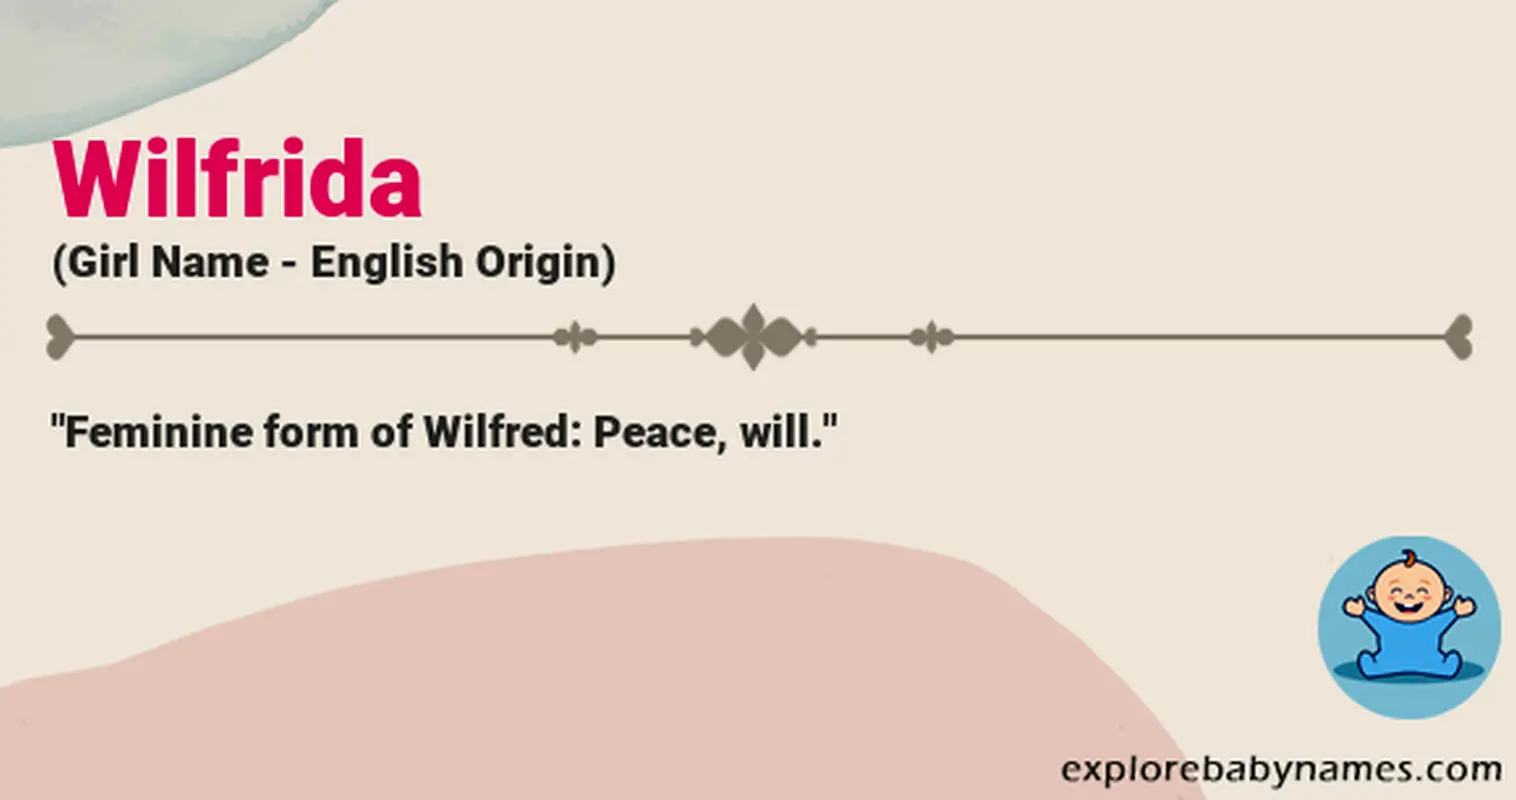 Meaning of Wilfrida